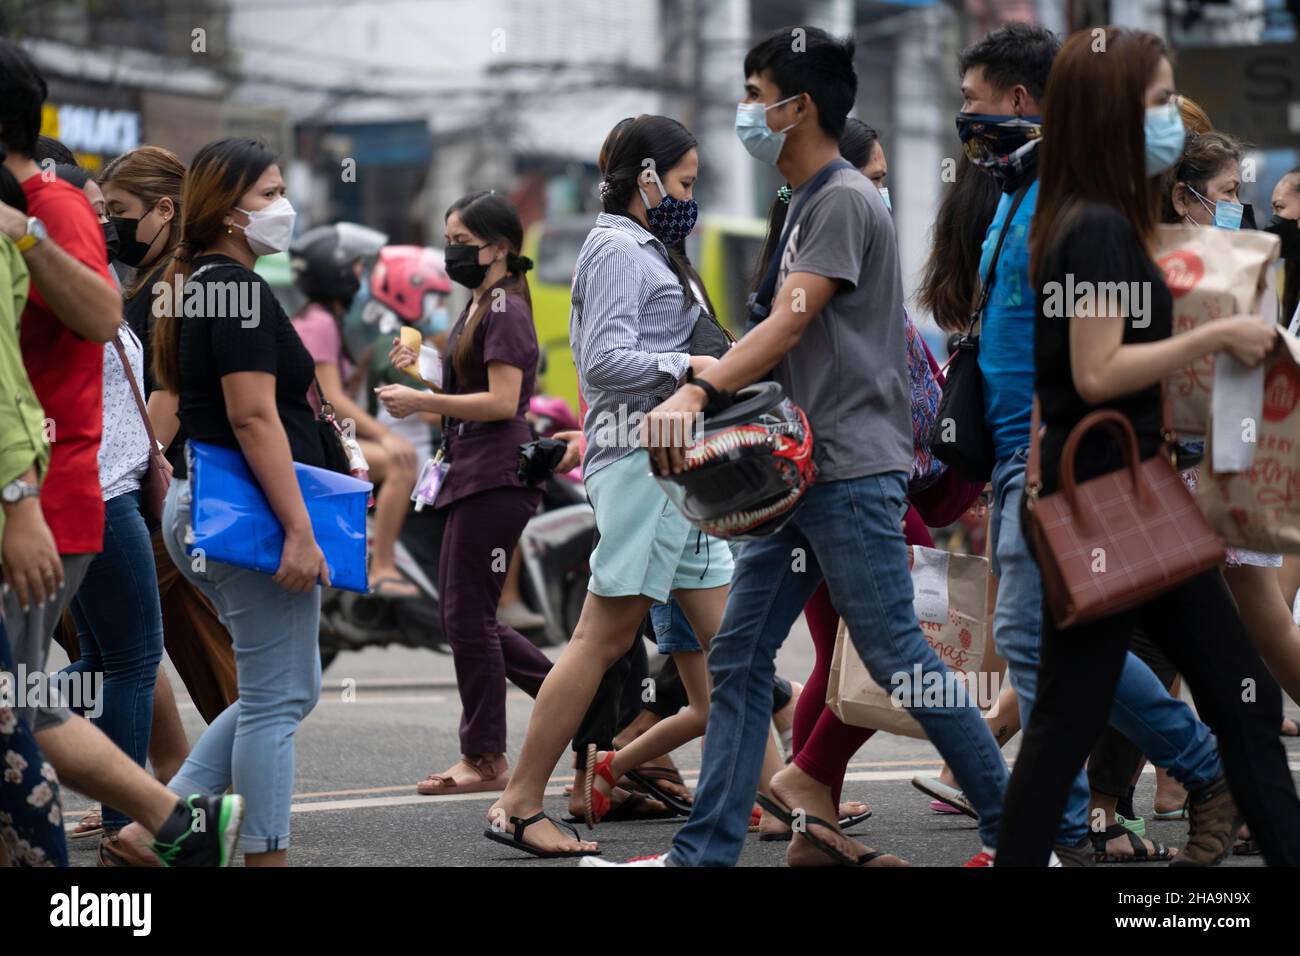 People in the Philippines crossing a road wearing face masks, the wearing of face masks in public places and establishments is mandatory. Stock Photo